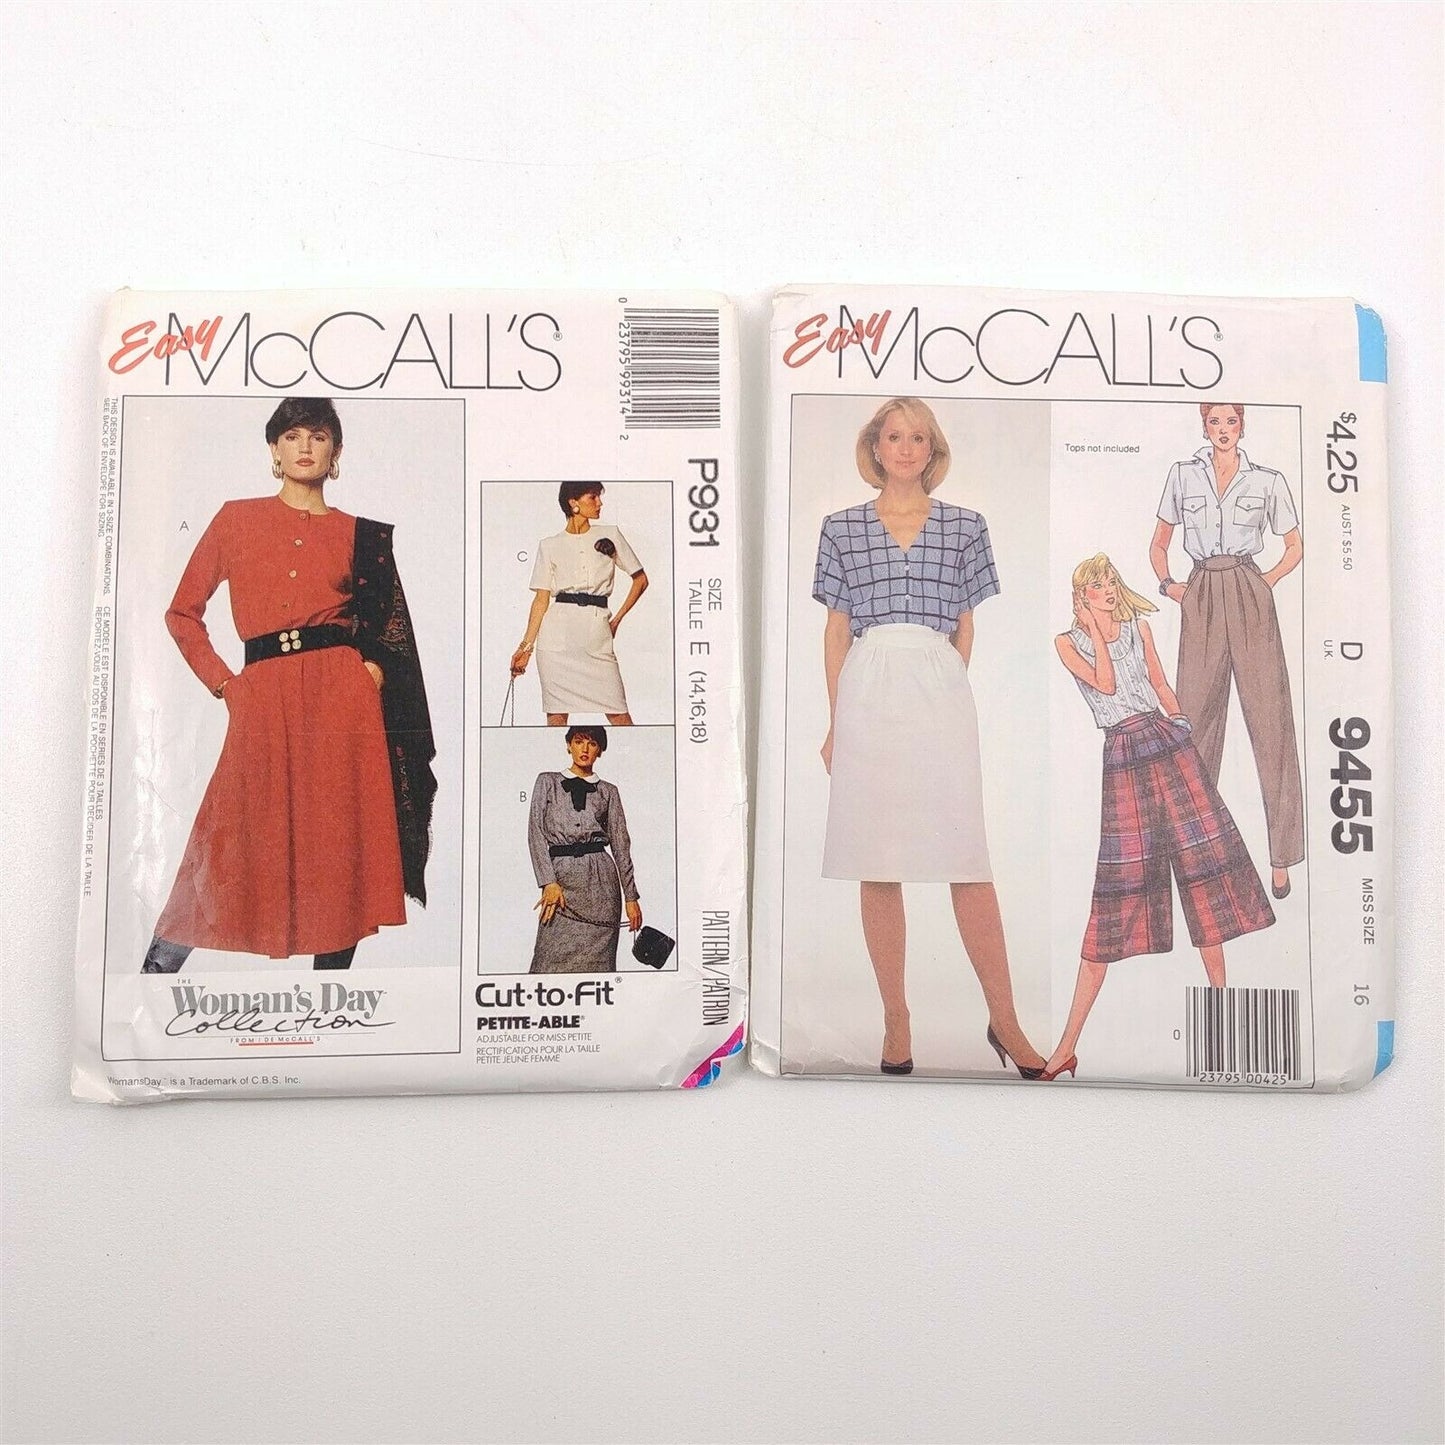 7 Vintage Sewing Patterns Womens Size 14 16 18 Simplicity McCall's Skirt Blazer